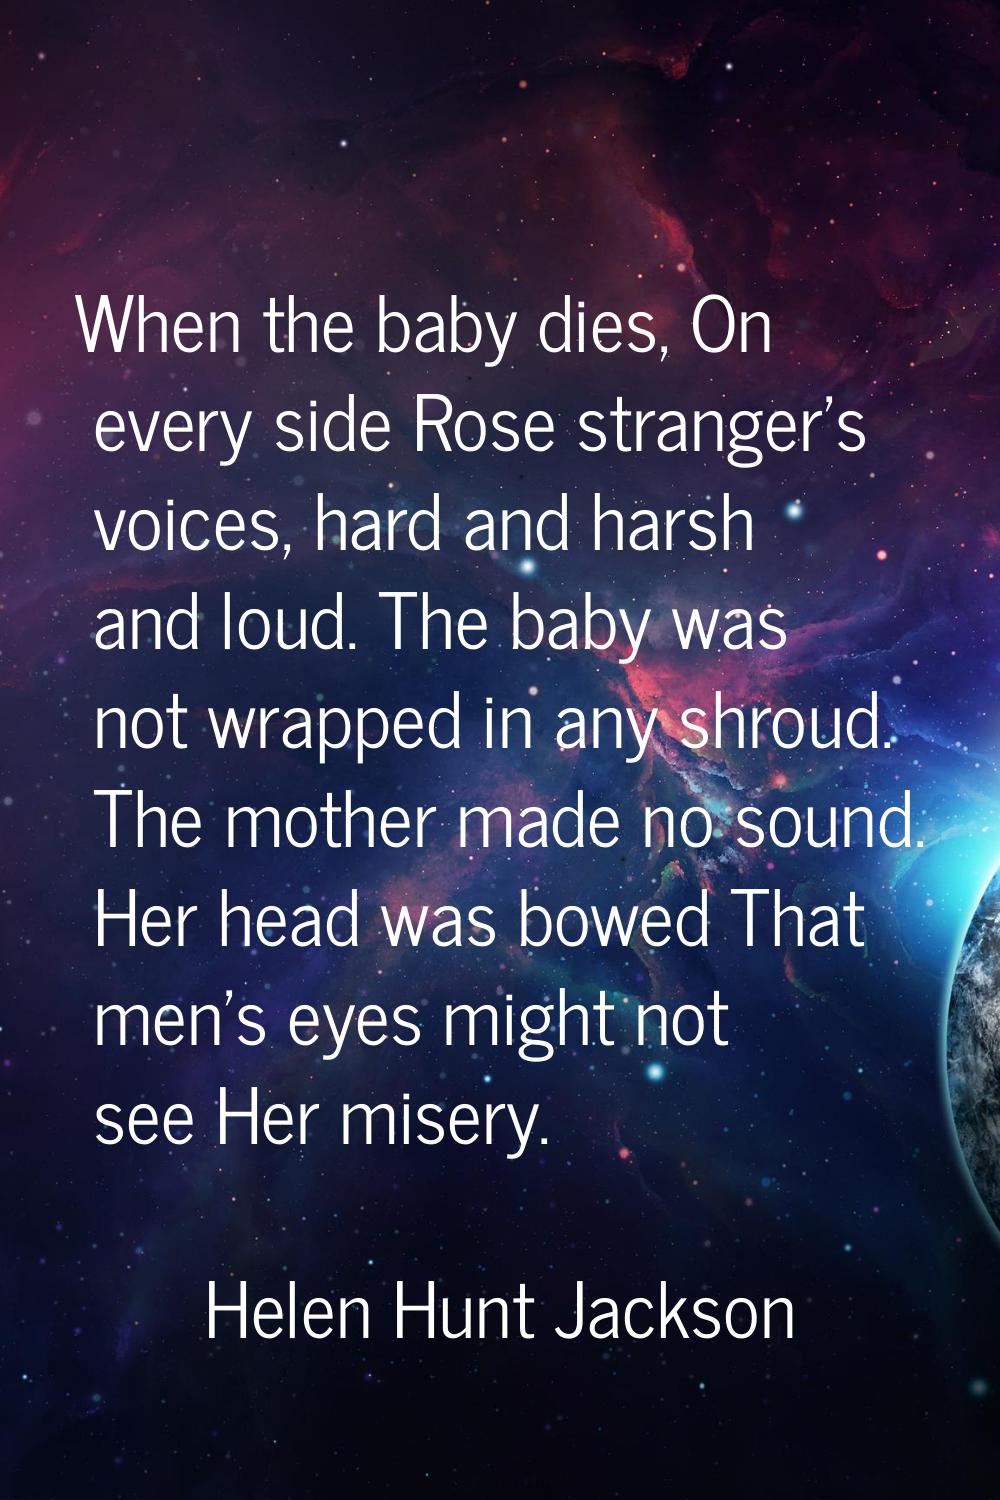 When the baby dies, On every side Rose stranger's voices, hard and harsh and loud. The baby was not